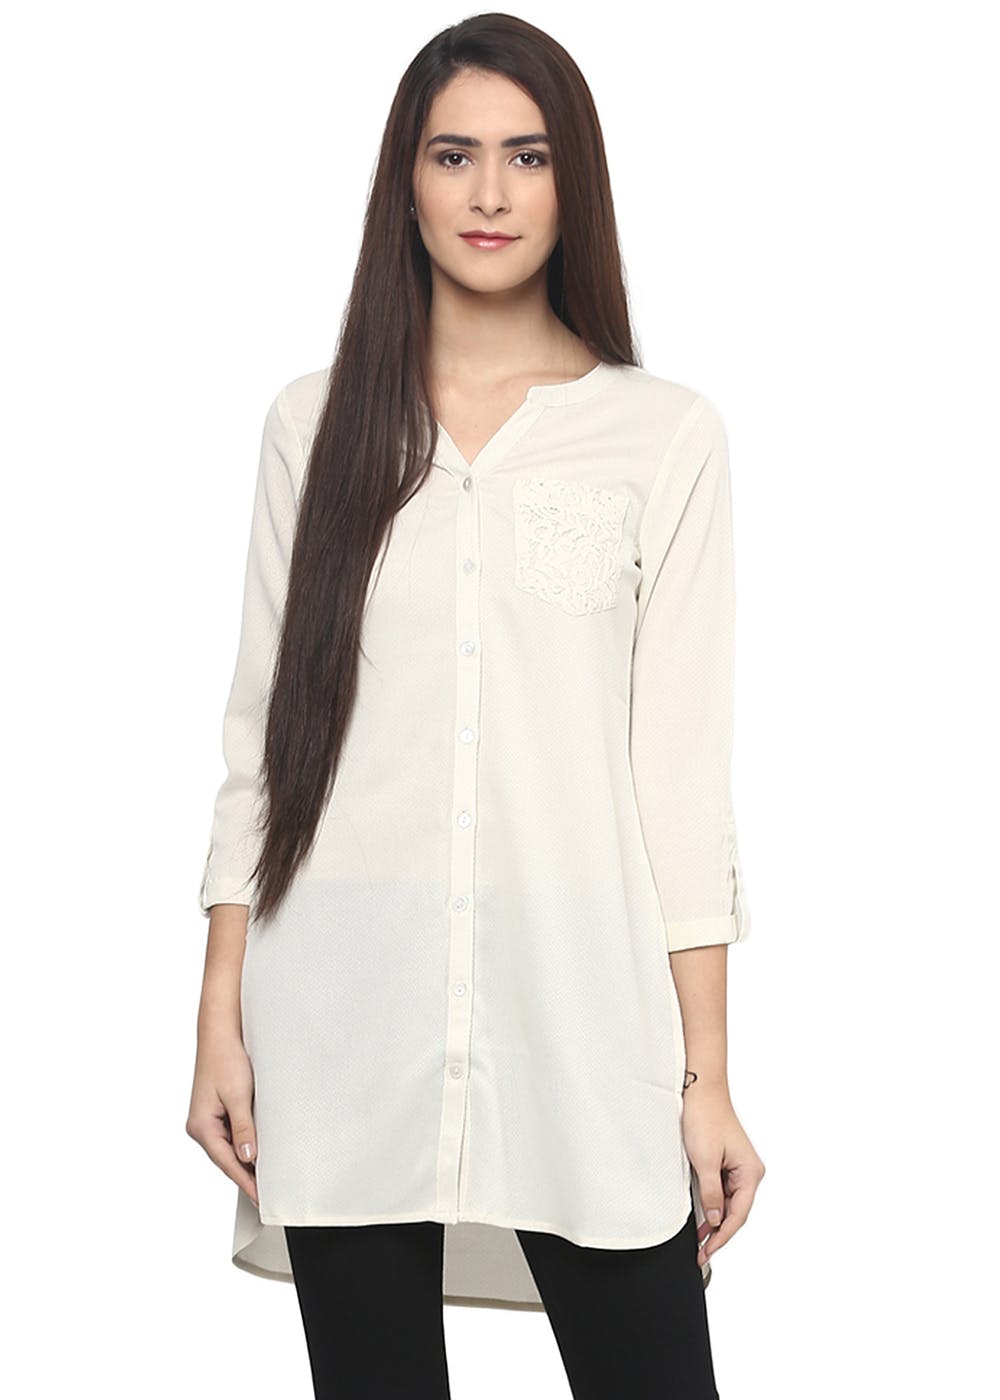 Get Lace Patch Pocket Detail Cream Button Down Tunic at ₹ 525 | LBB Shop